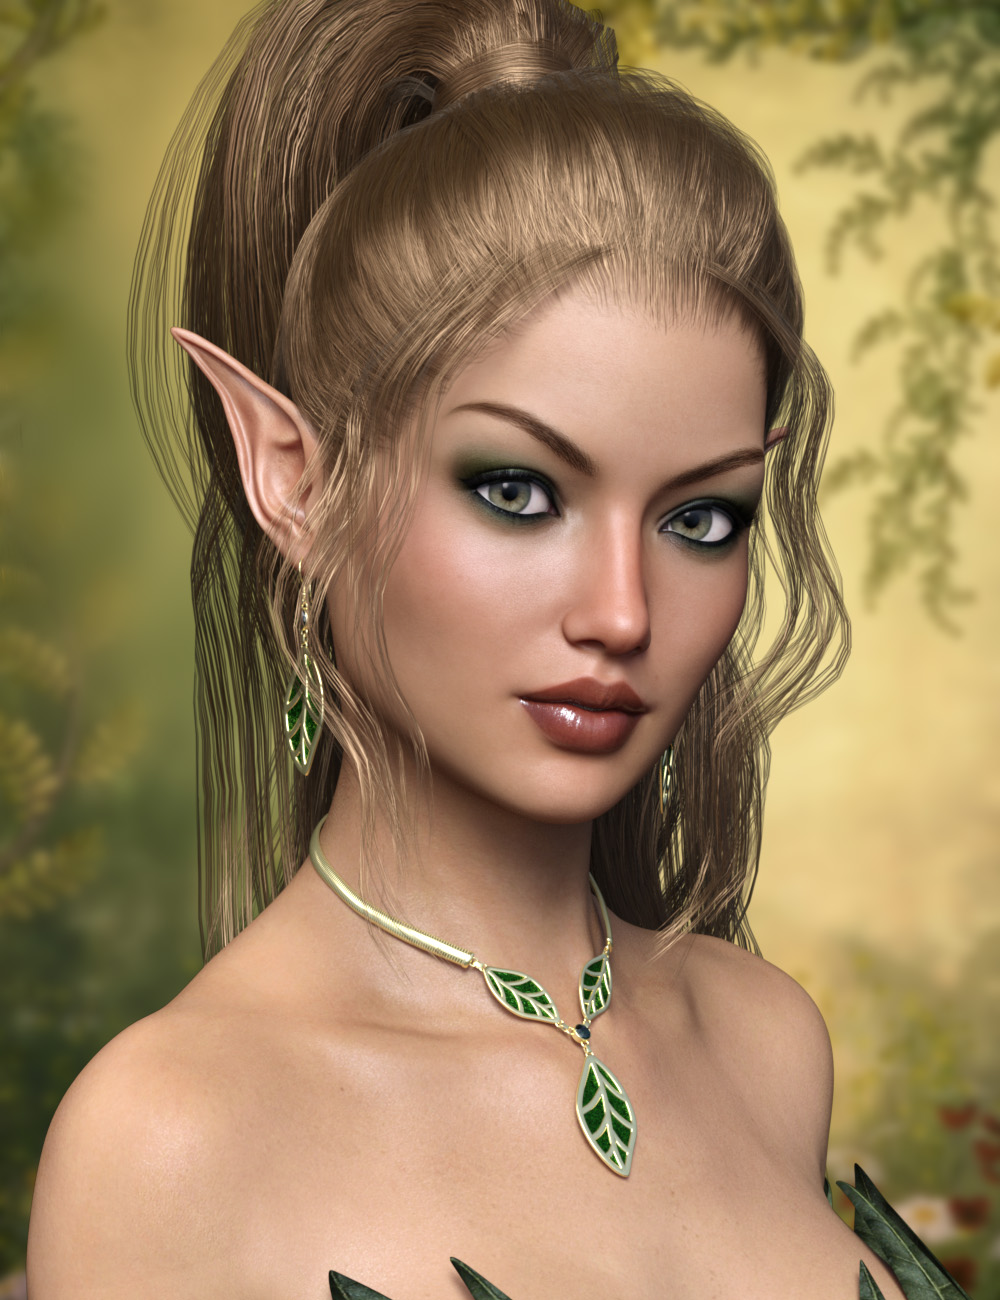 FWSA Vanessa HD for Victoria 7 and her Jewelry by: Fred Winkler ArtSabbyFisty & Darc, 3D Models by Daz 3D